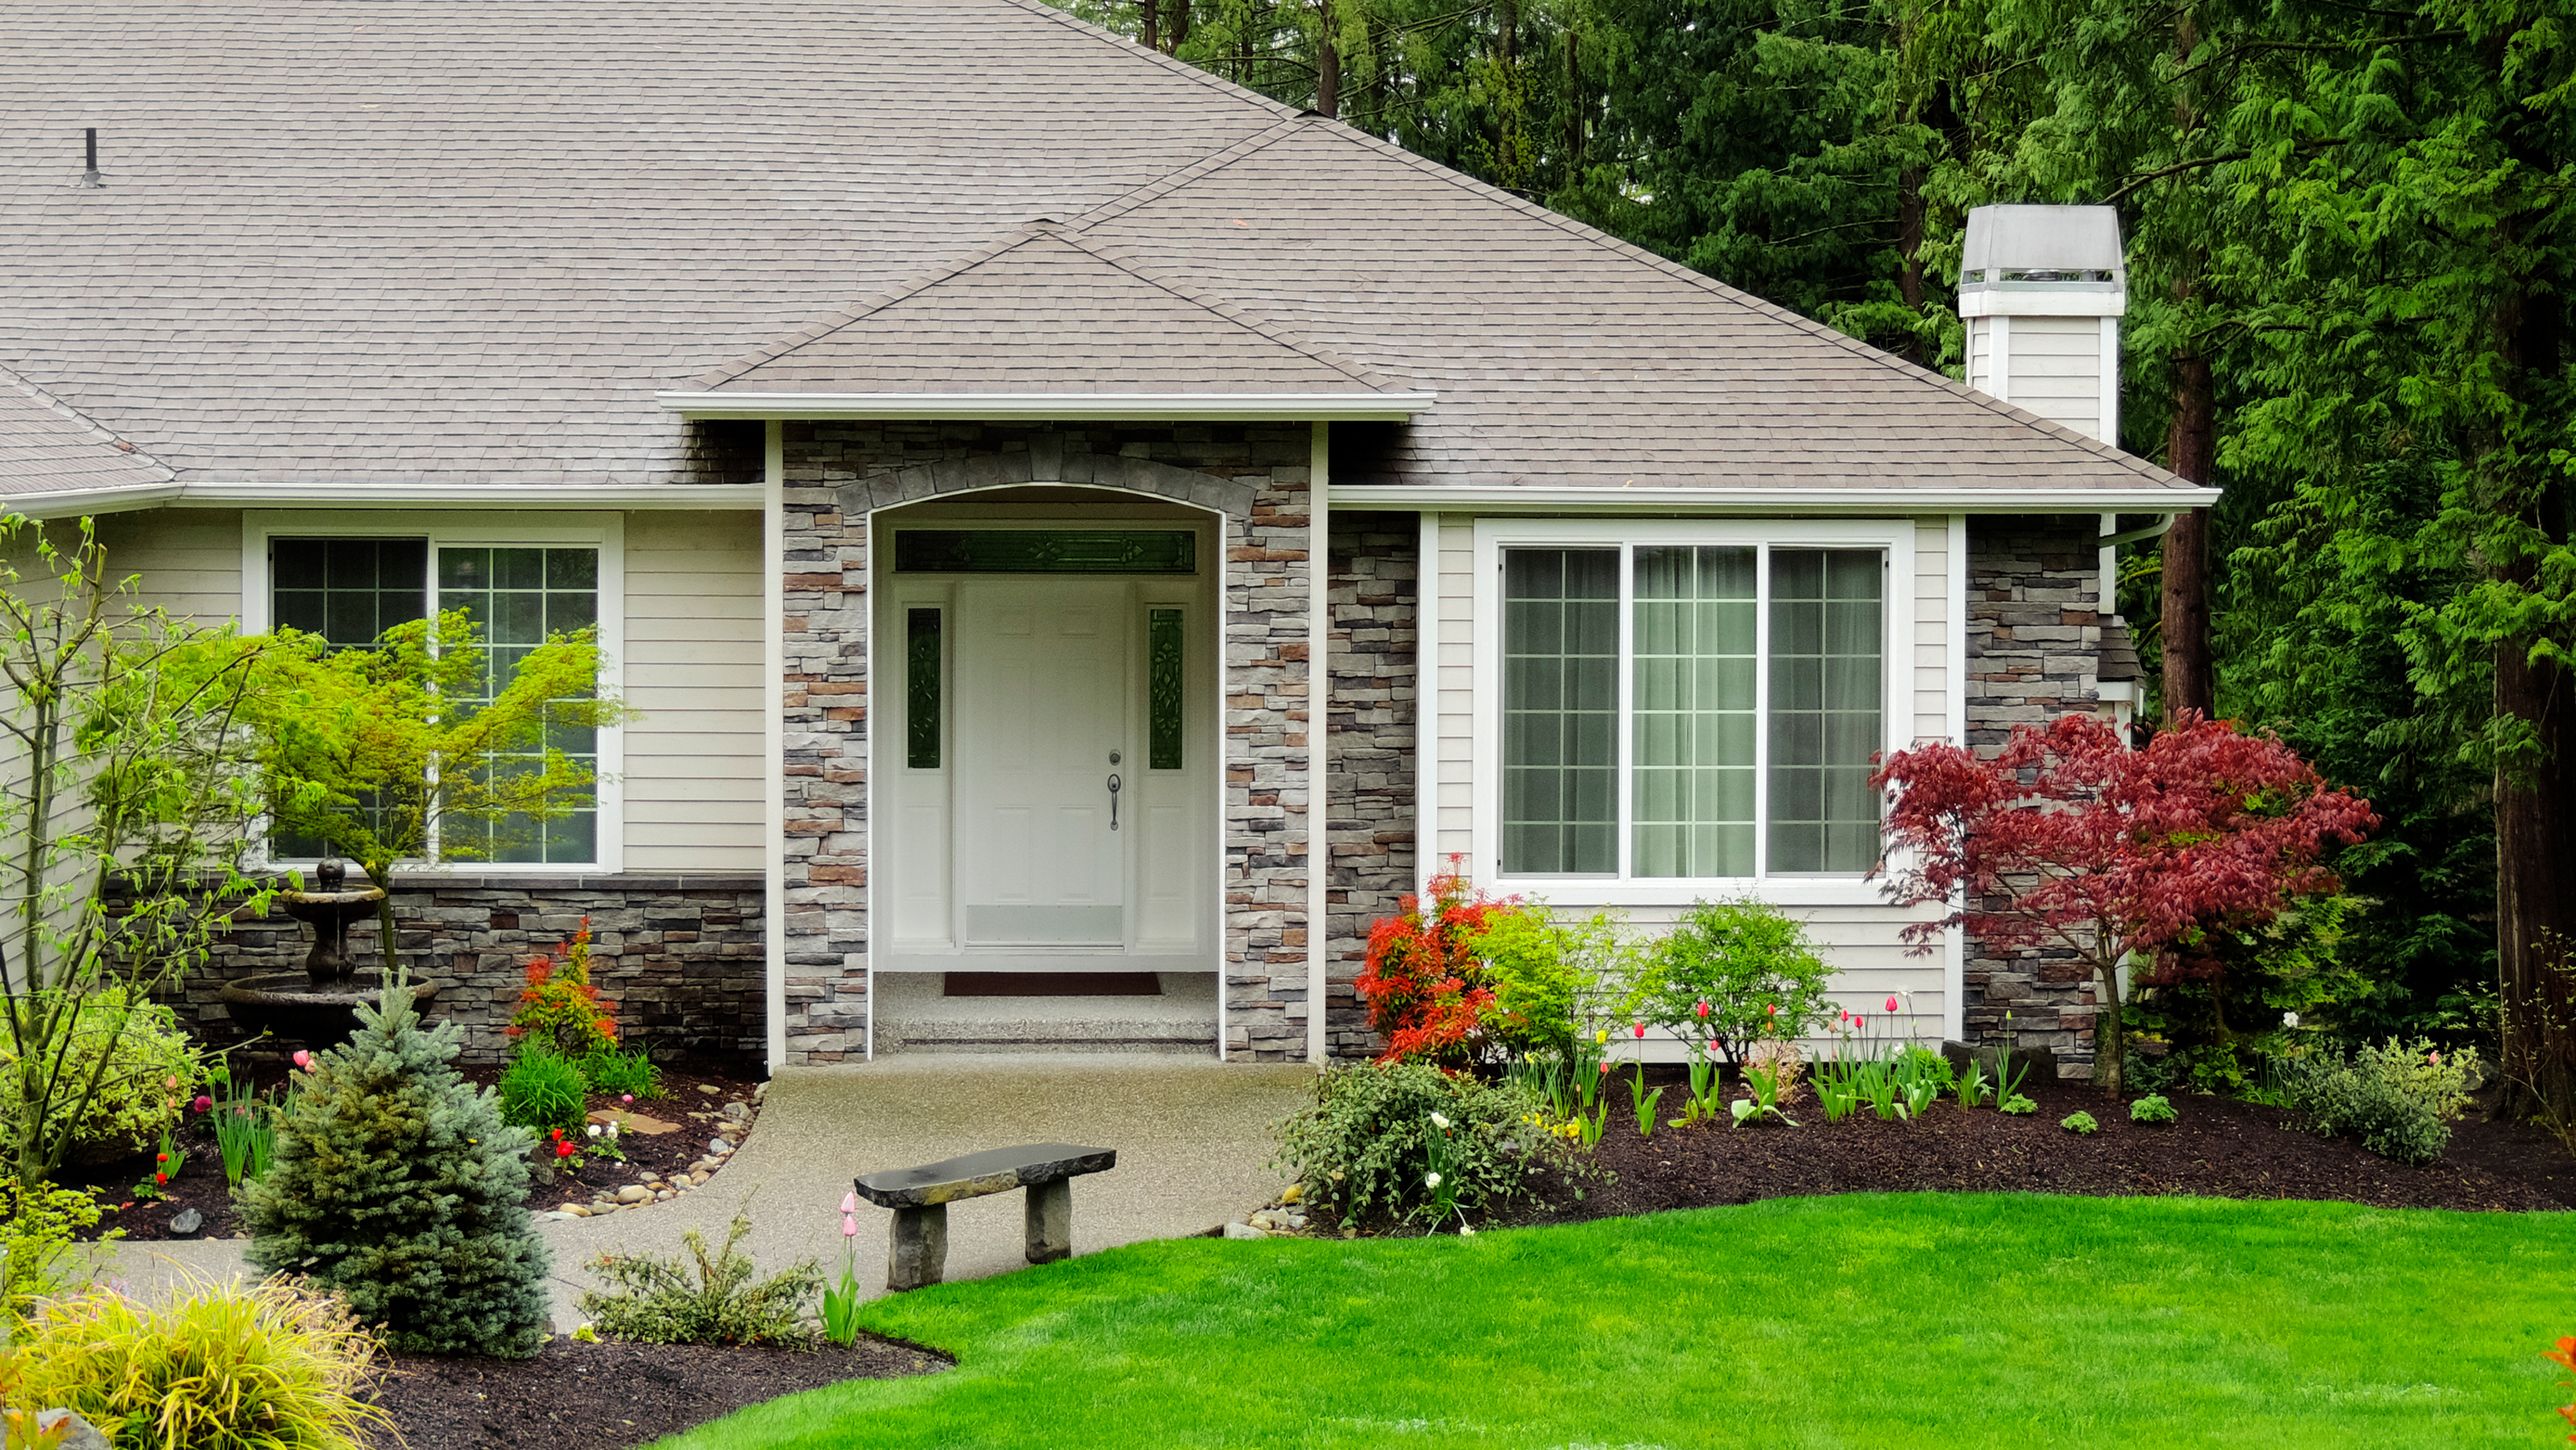  Small Front Yard Landscaping Ideas That Are Low Maintenance Real Homes